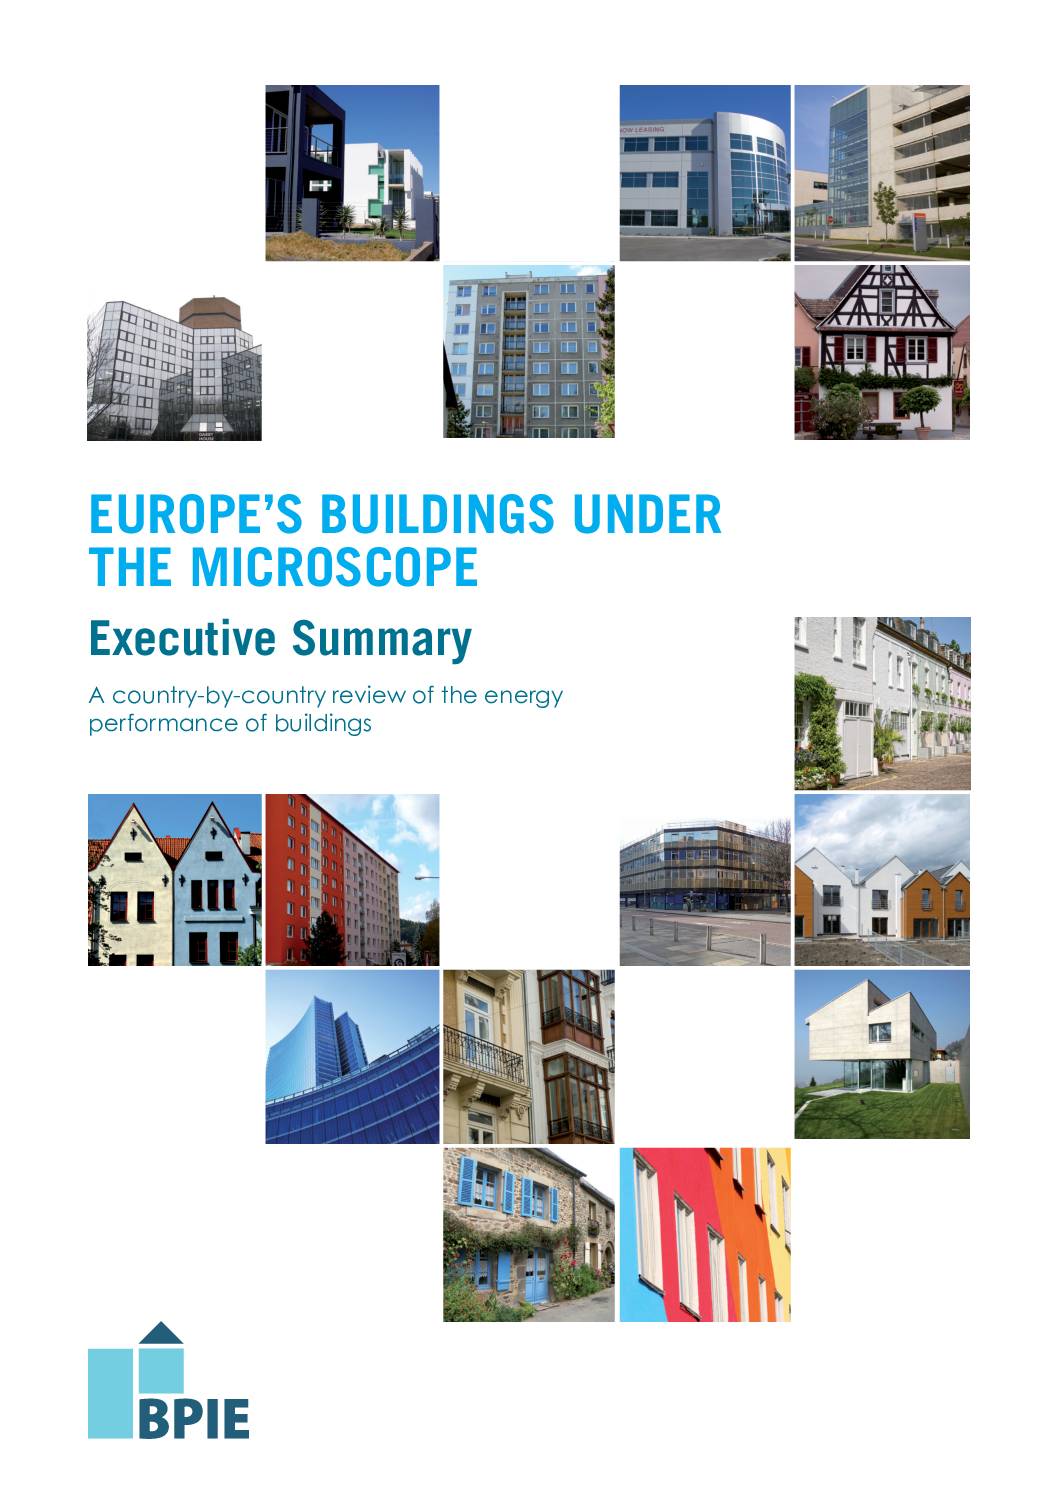 Europe’s Buildings Under the Microscope: A country-by-country review of the energy performance of buildings